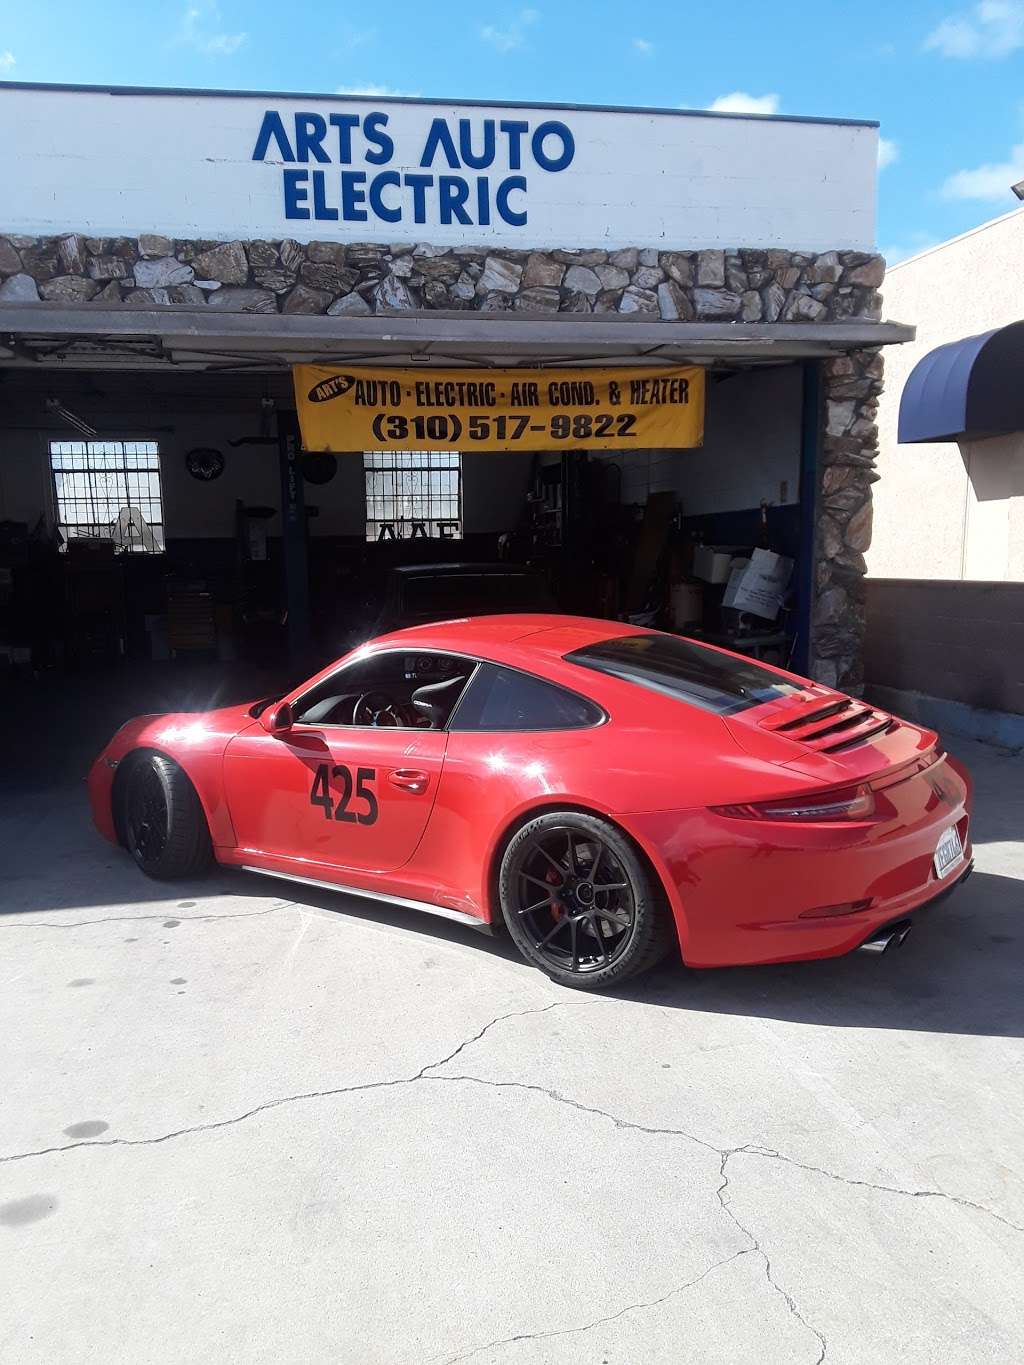 Arts Auto Electric & air conditioning | 5427, 22853 Arlington Ave, Torrance, CA 90501 | Phone: (310) 517-9822